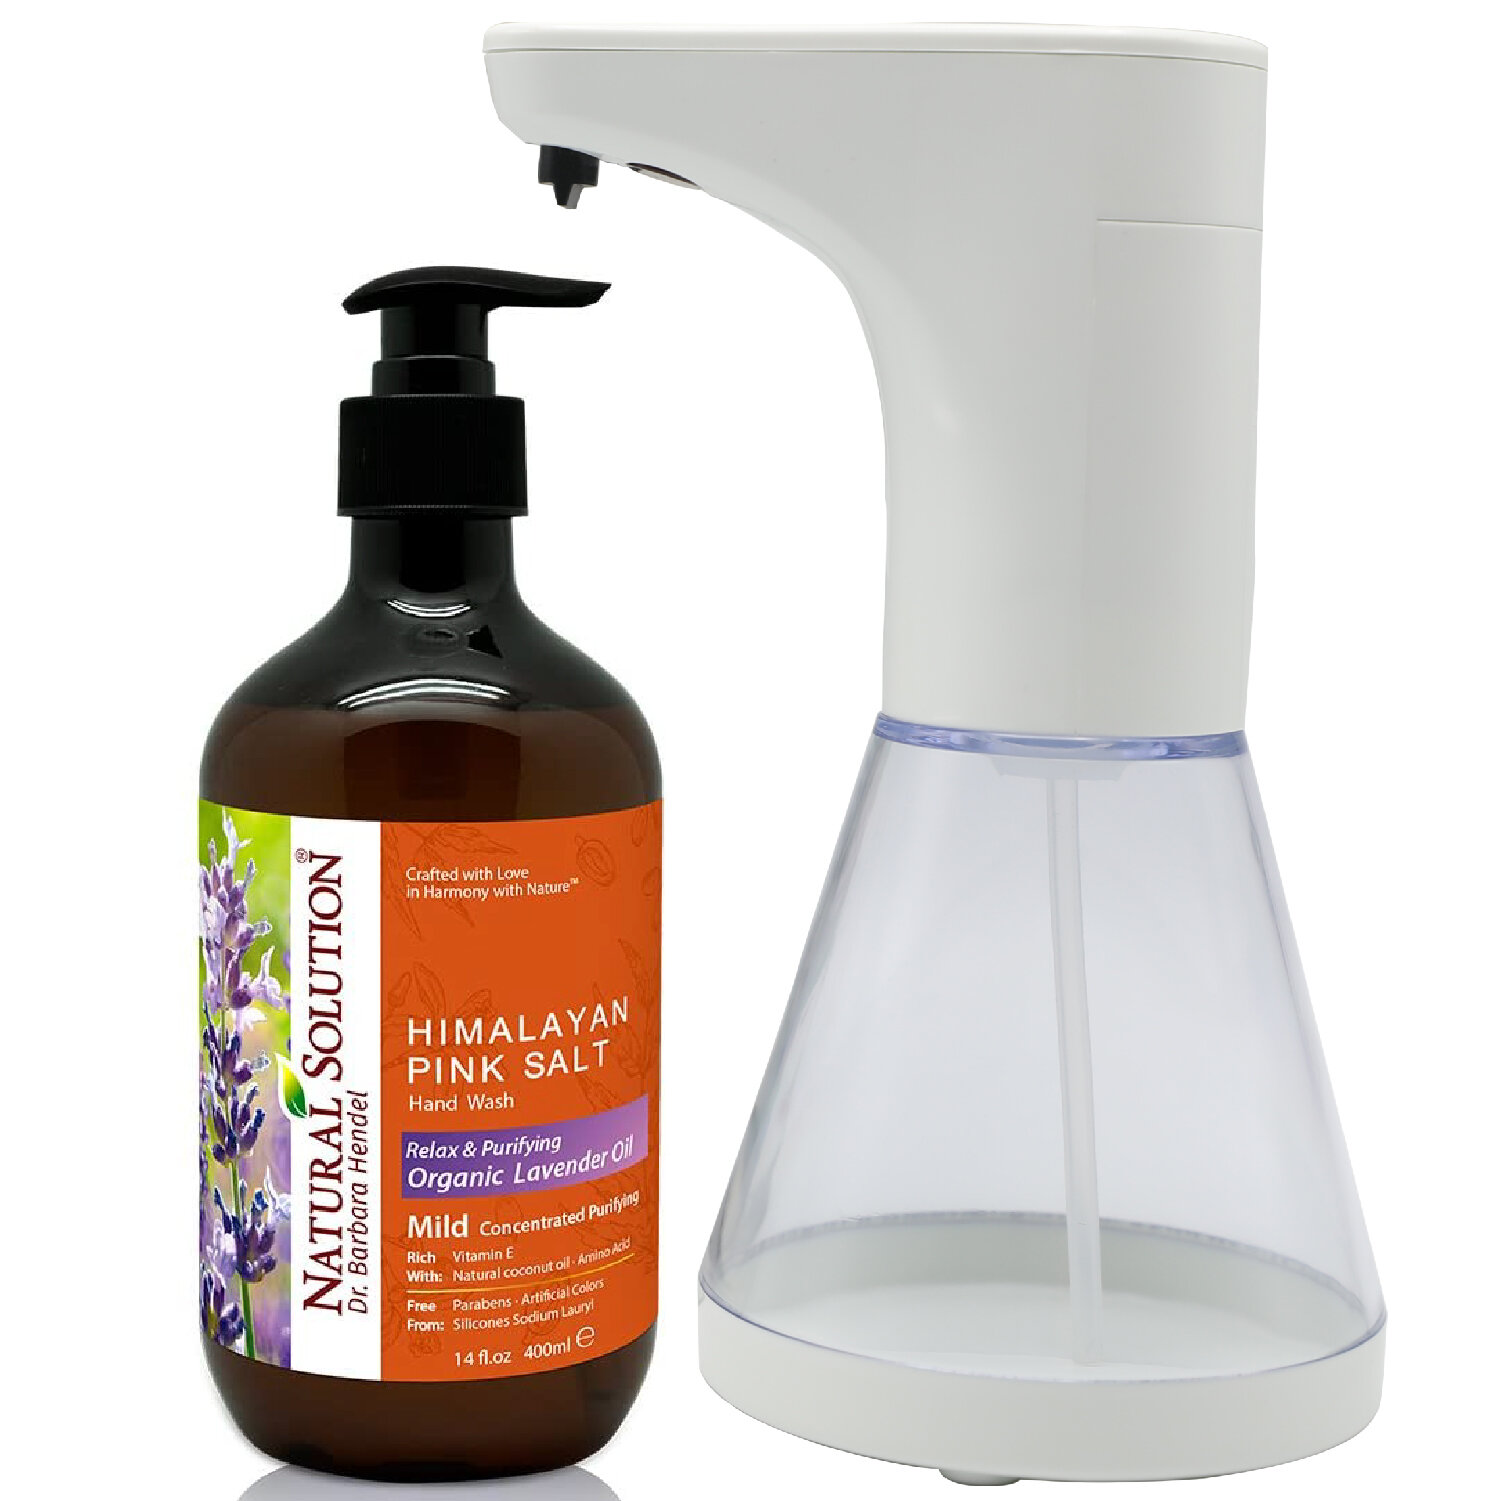 automatic hand wash with soap solution